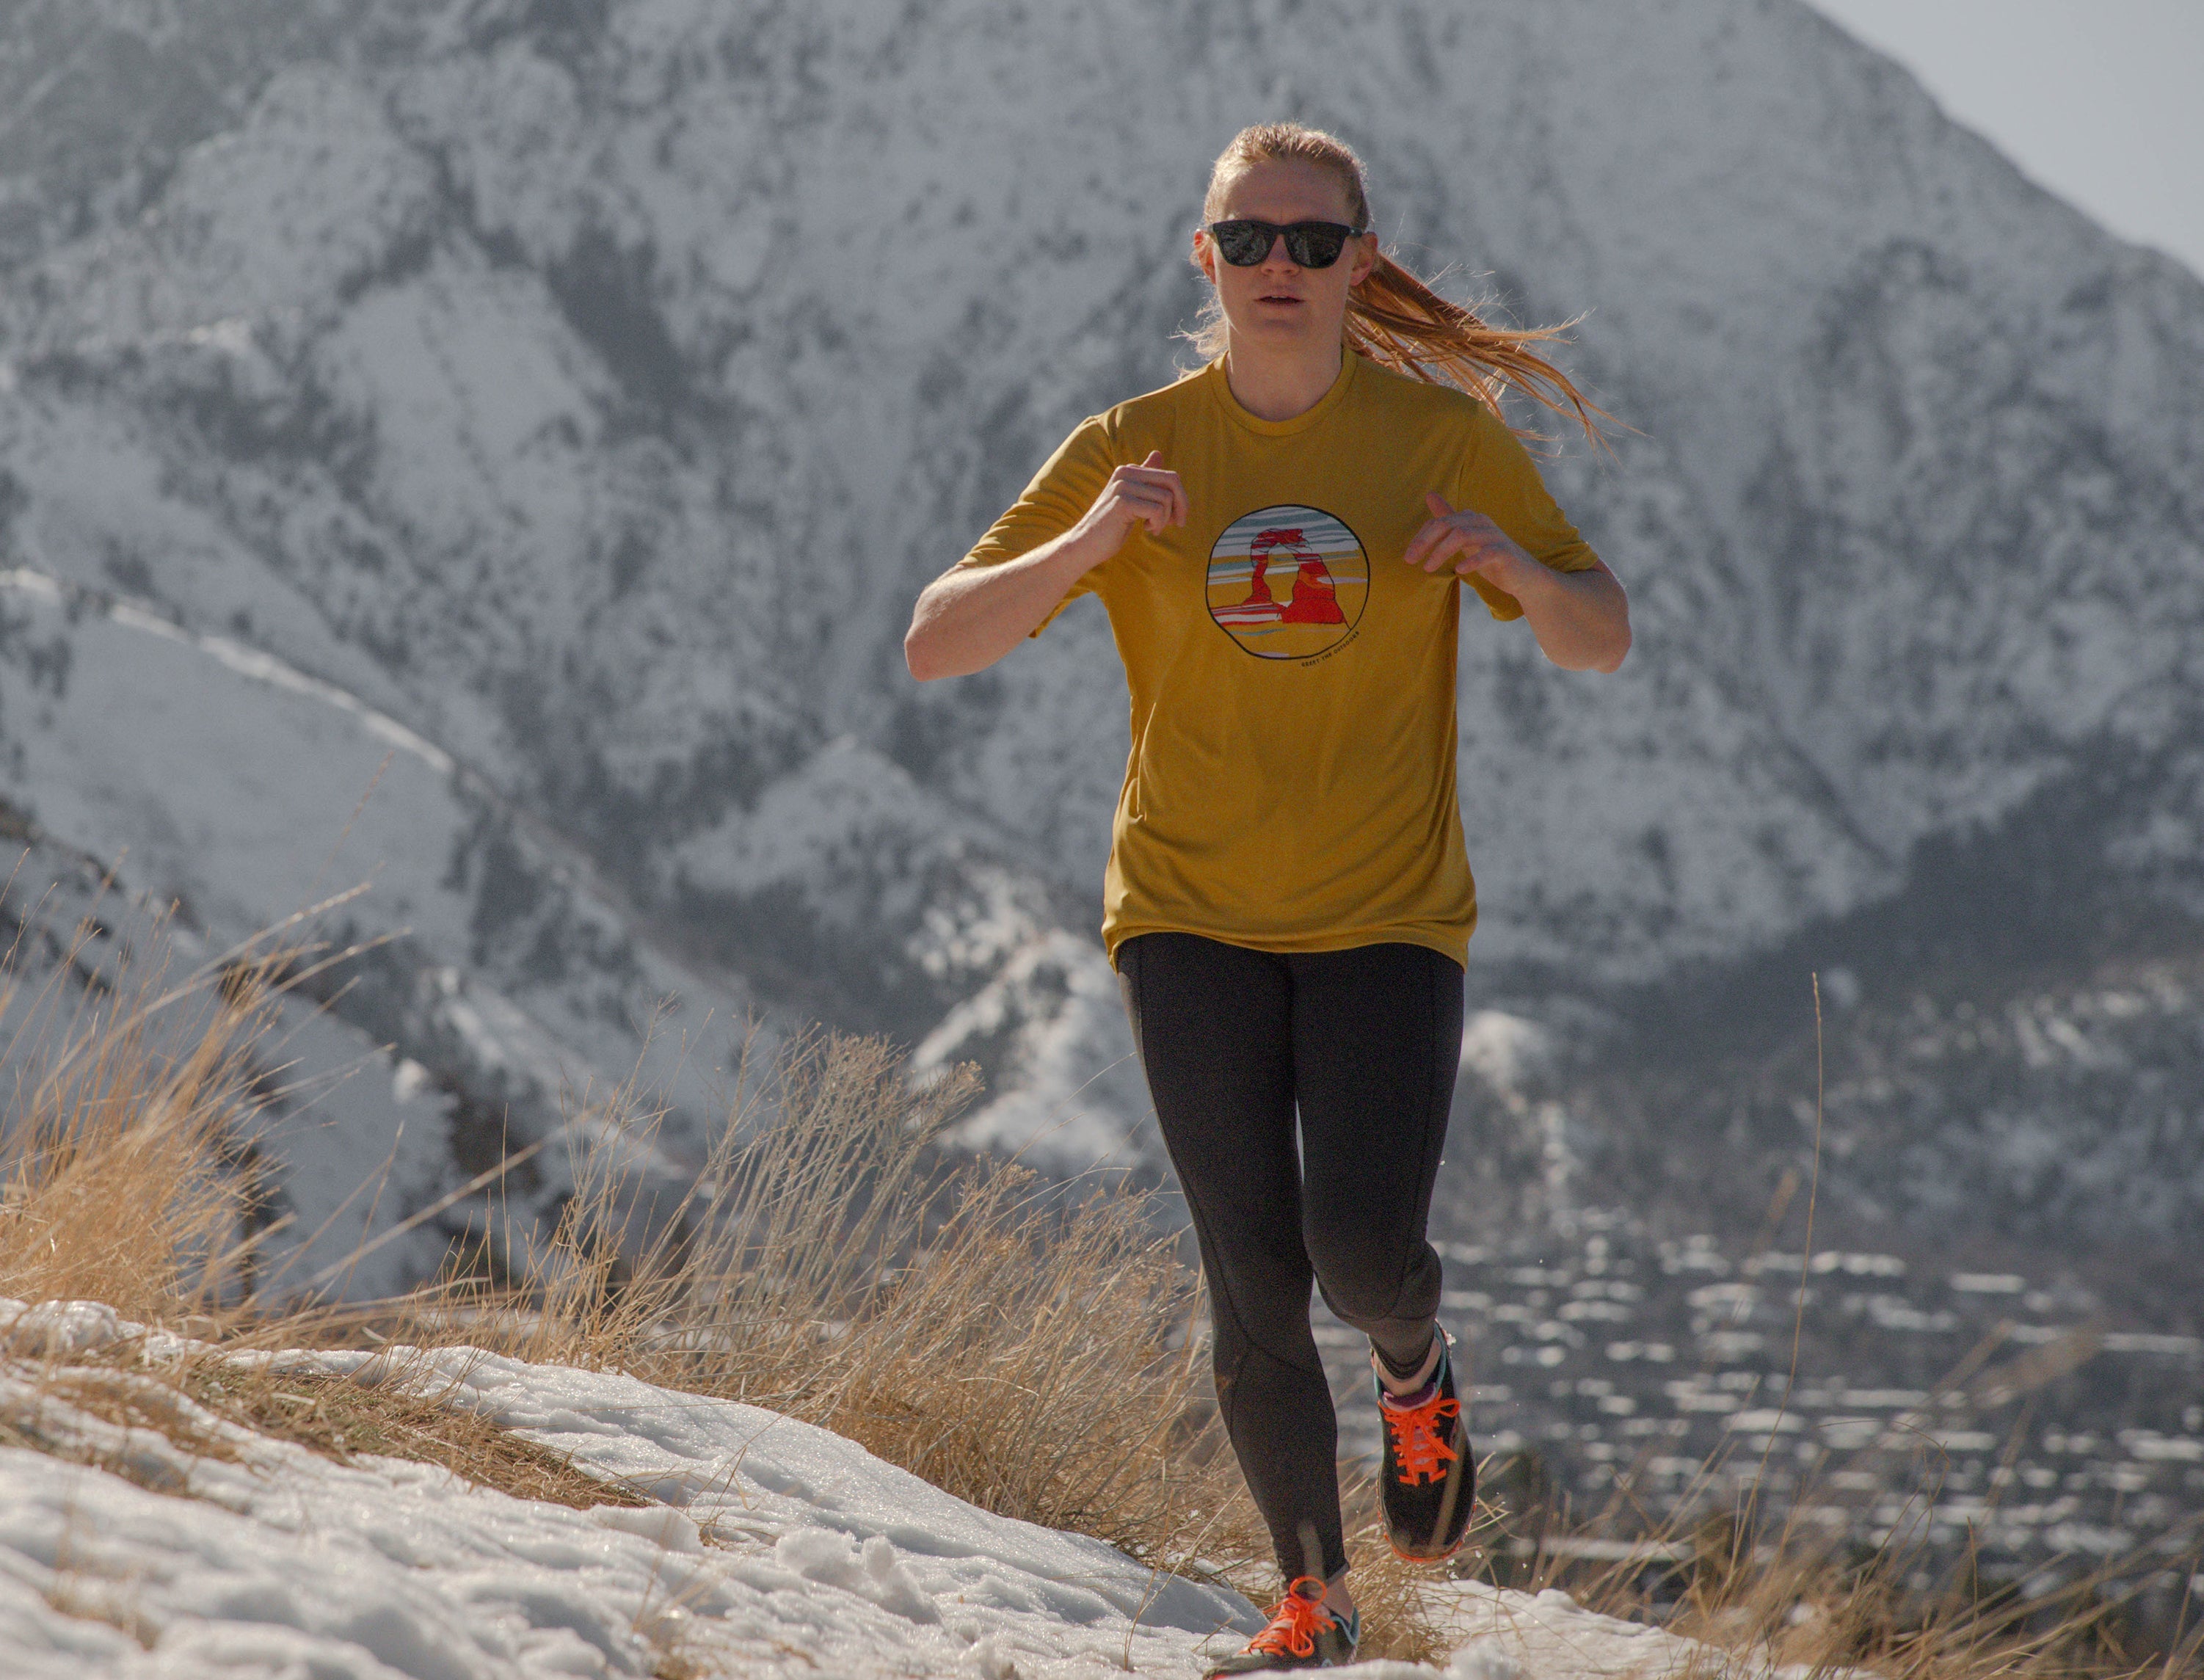 Arch Dri-Fit Tee: Stay Cool and Comfortable with Performance Wear